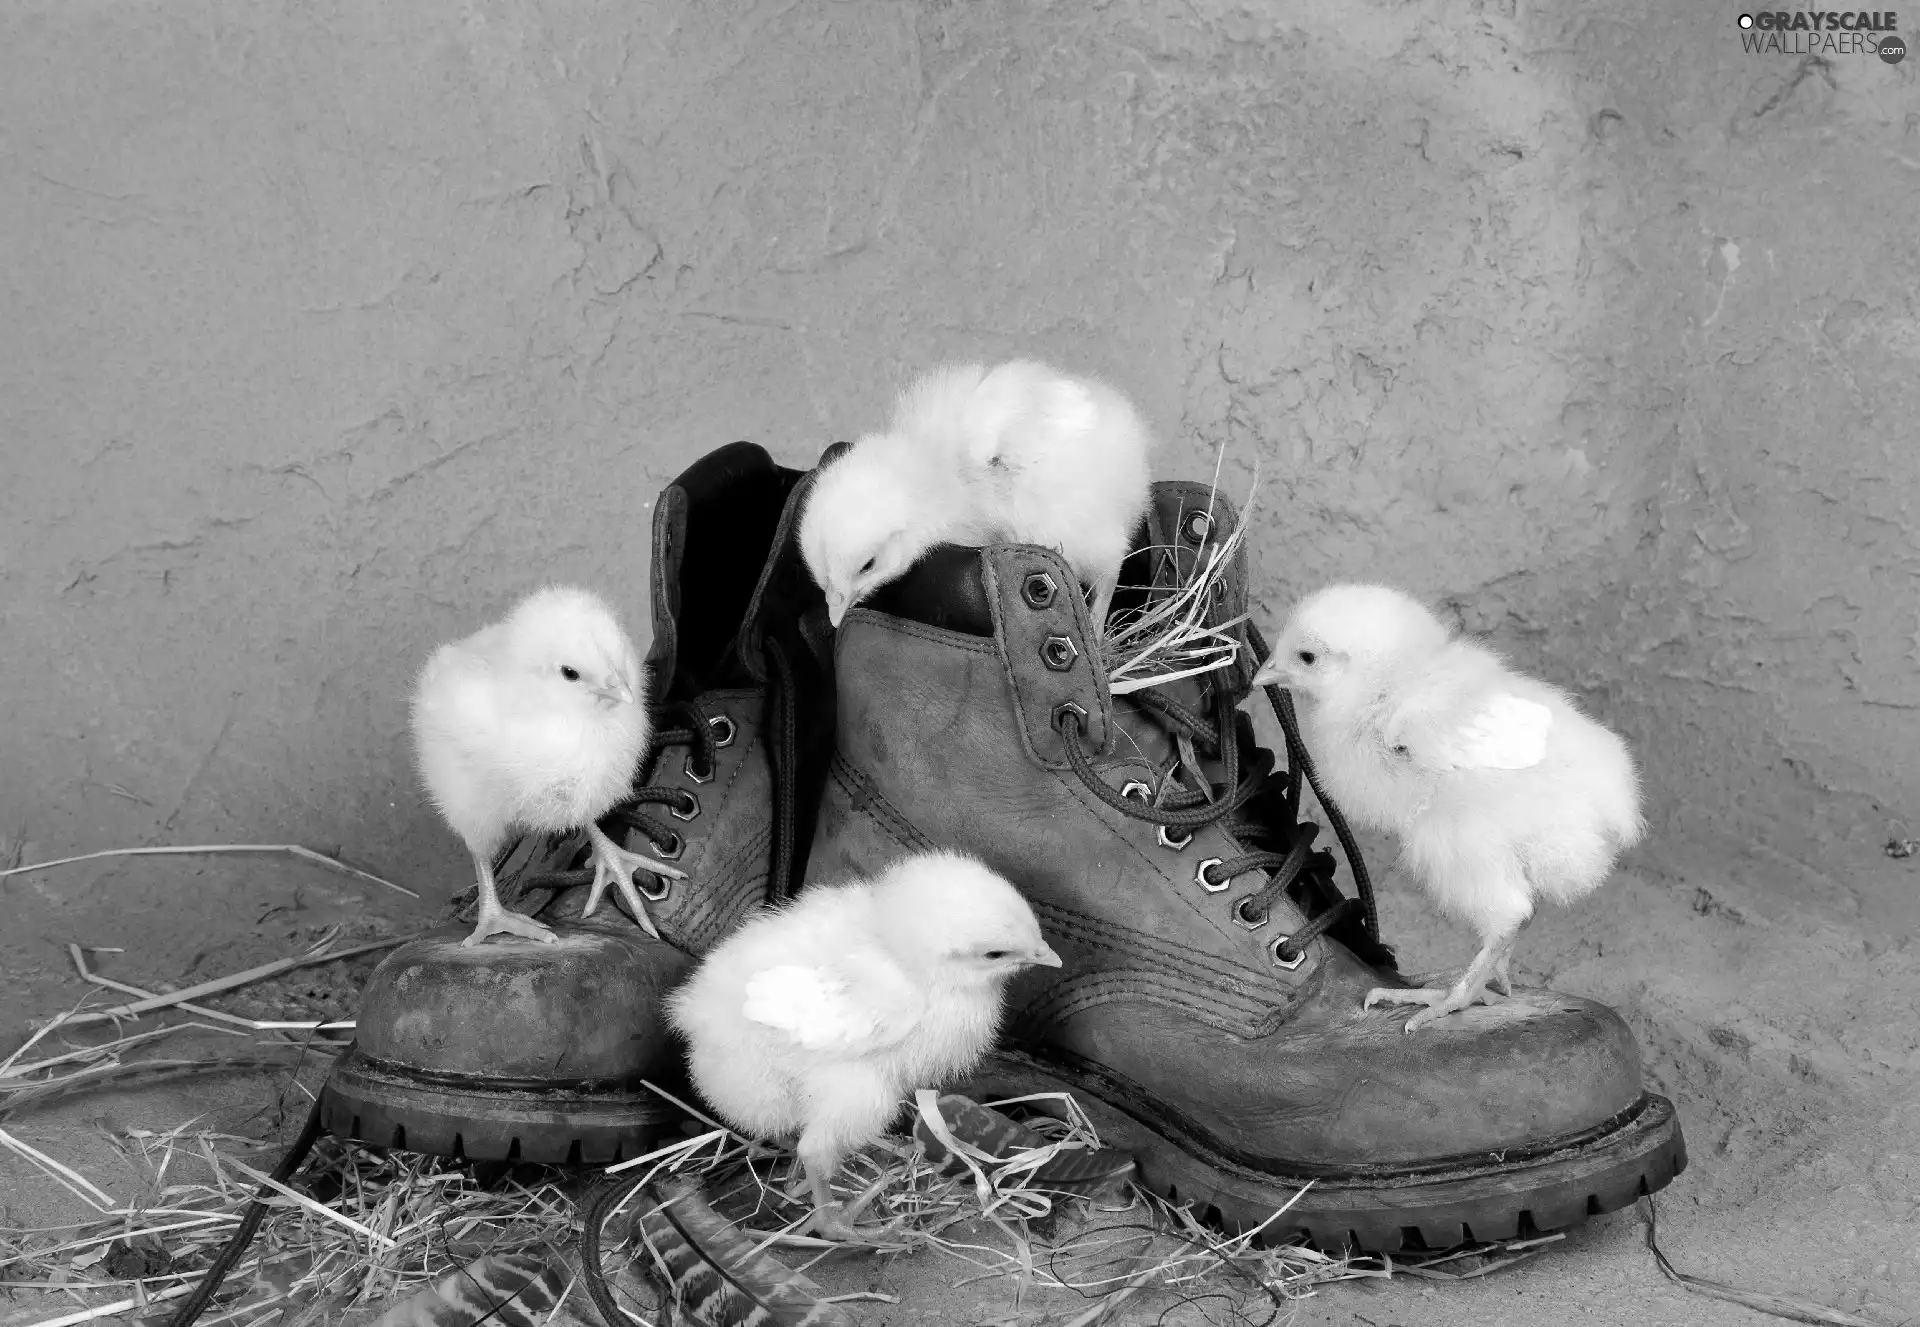 Boots, little doggies, chickens